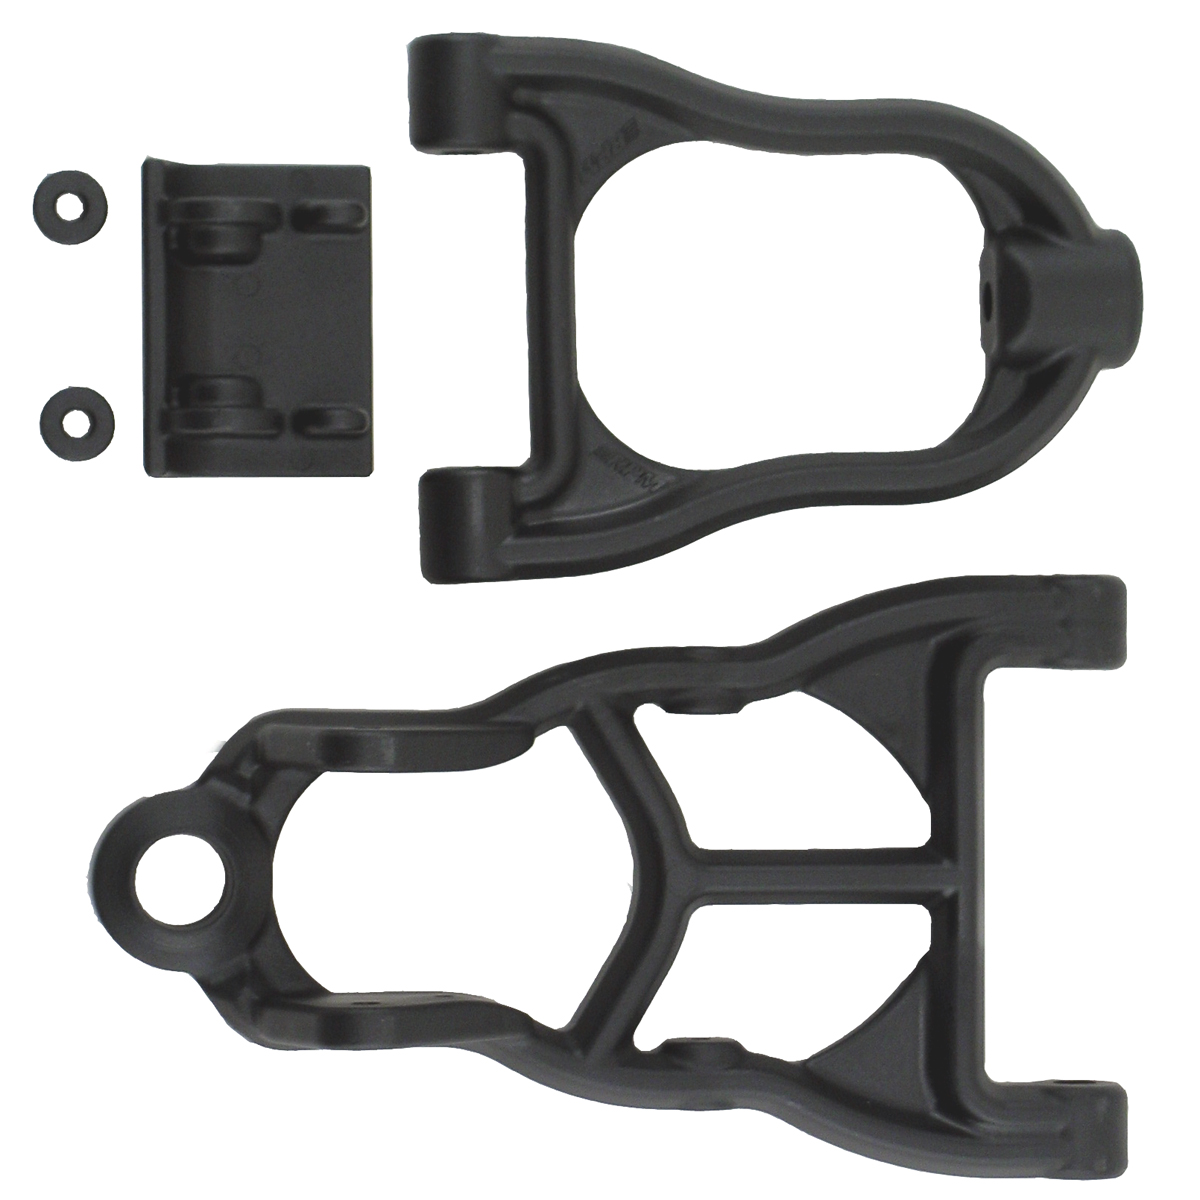 RPM R/C Products 82252 Rear Upper/Lower A-Arms Black HPI 5b/5t